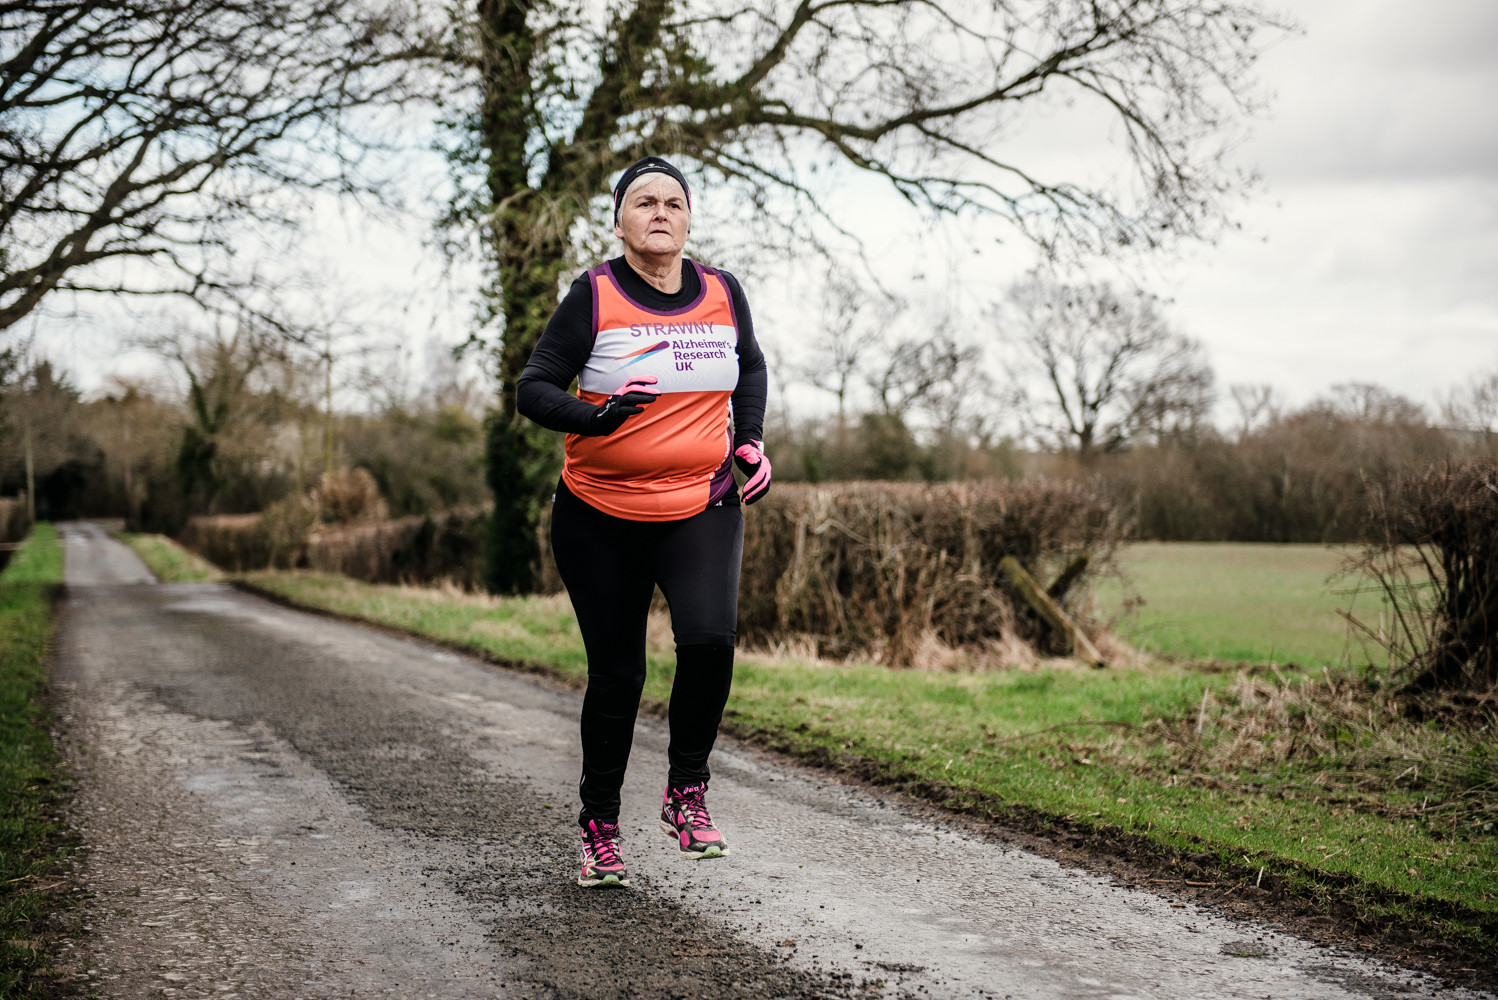 A dementia patient will show she can run and complete the London Marathon